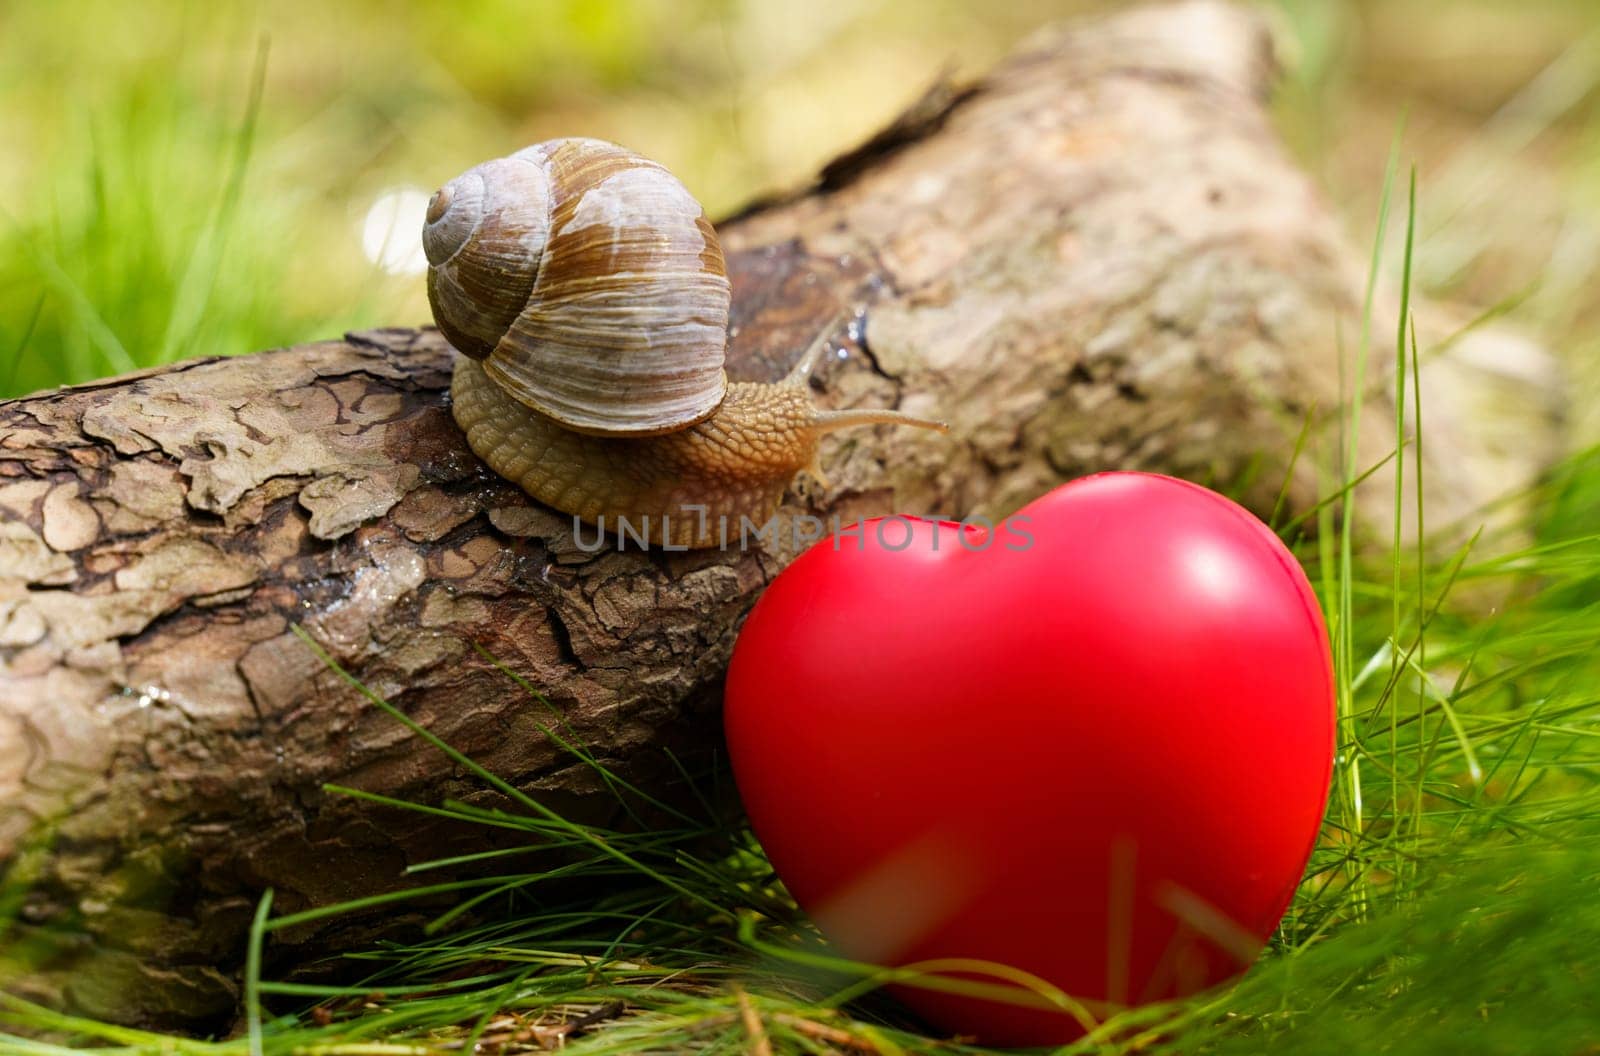 The snail crawls up the tree near the heart, which lies in the grass. by Sd28DimoN_1976